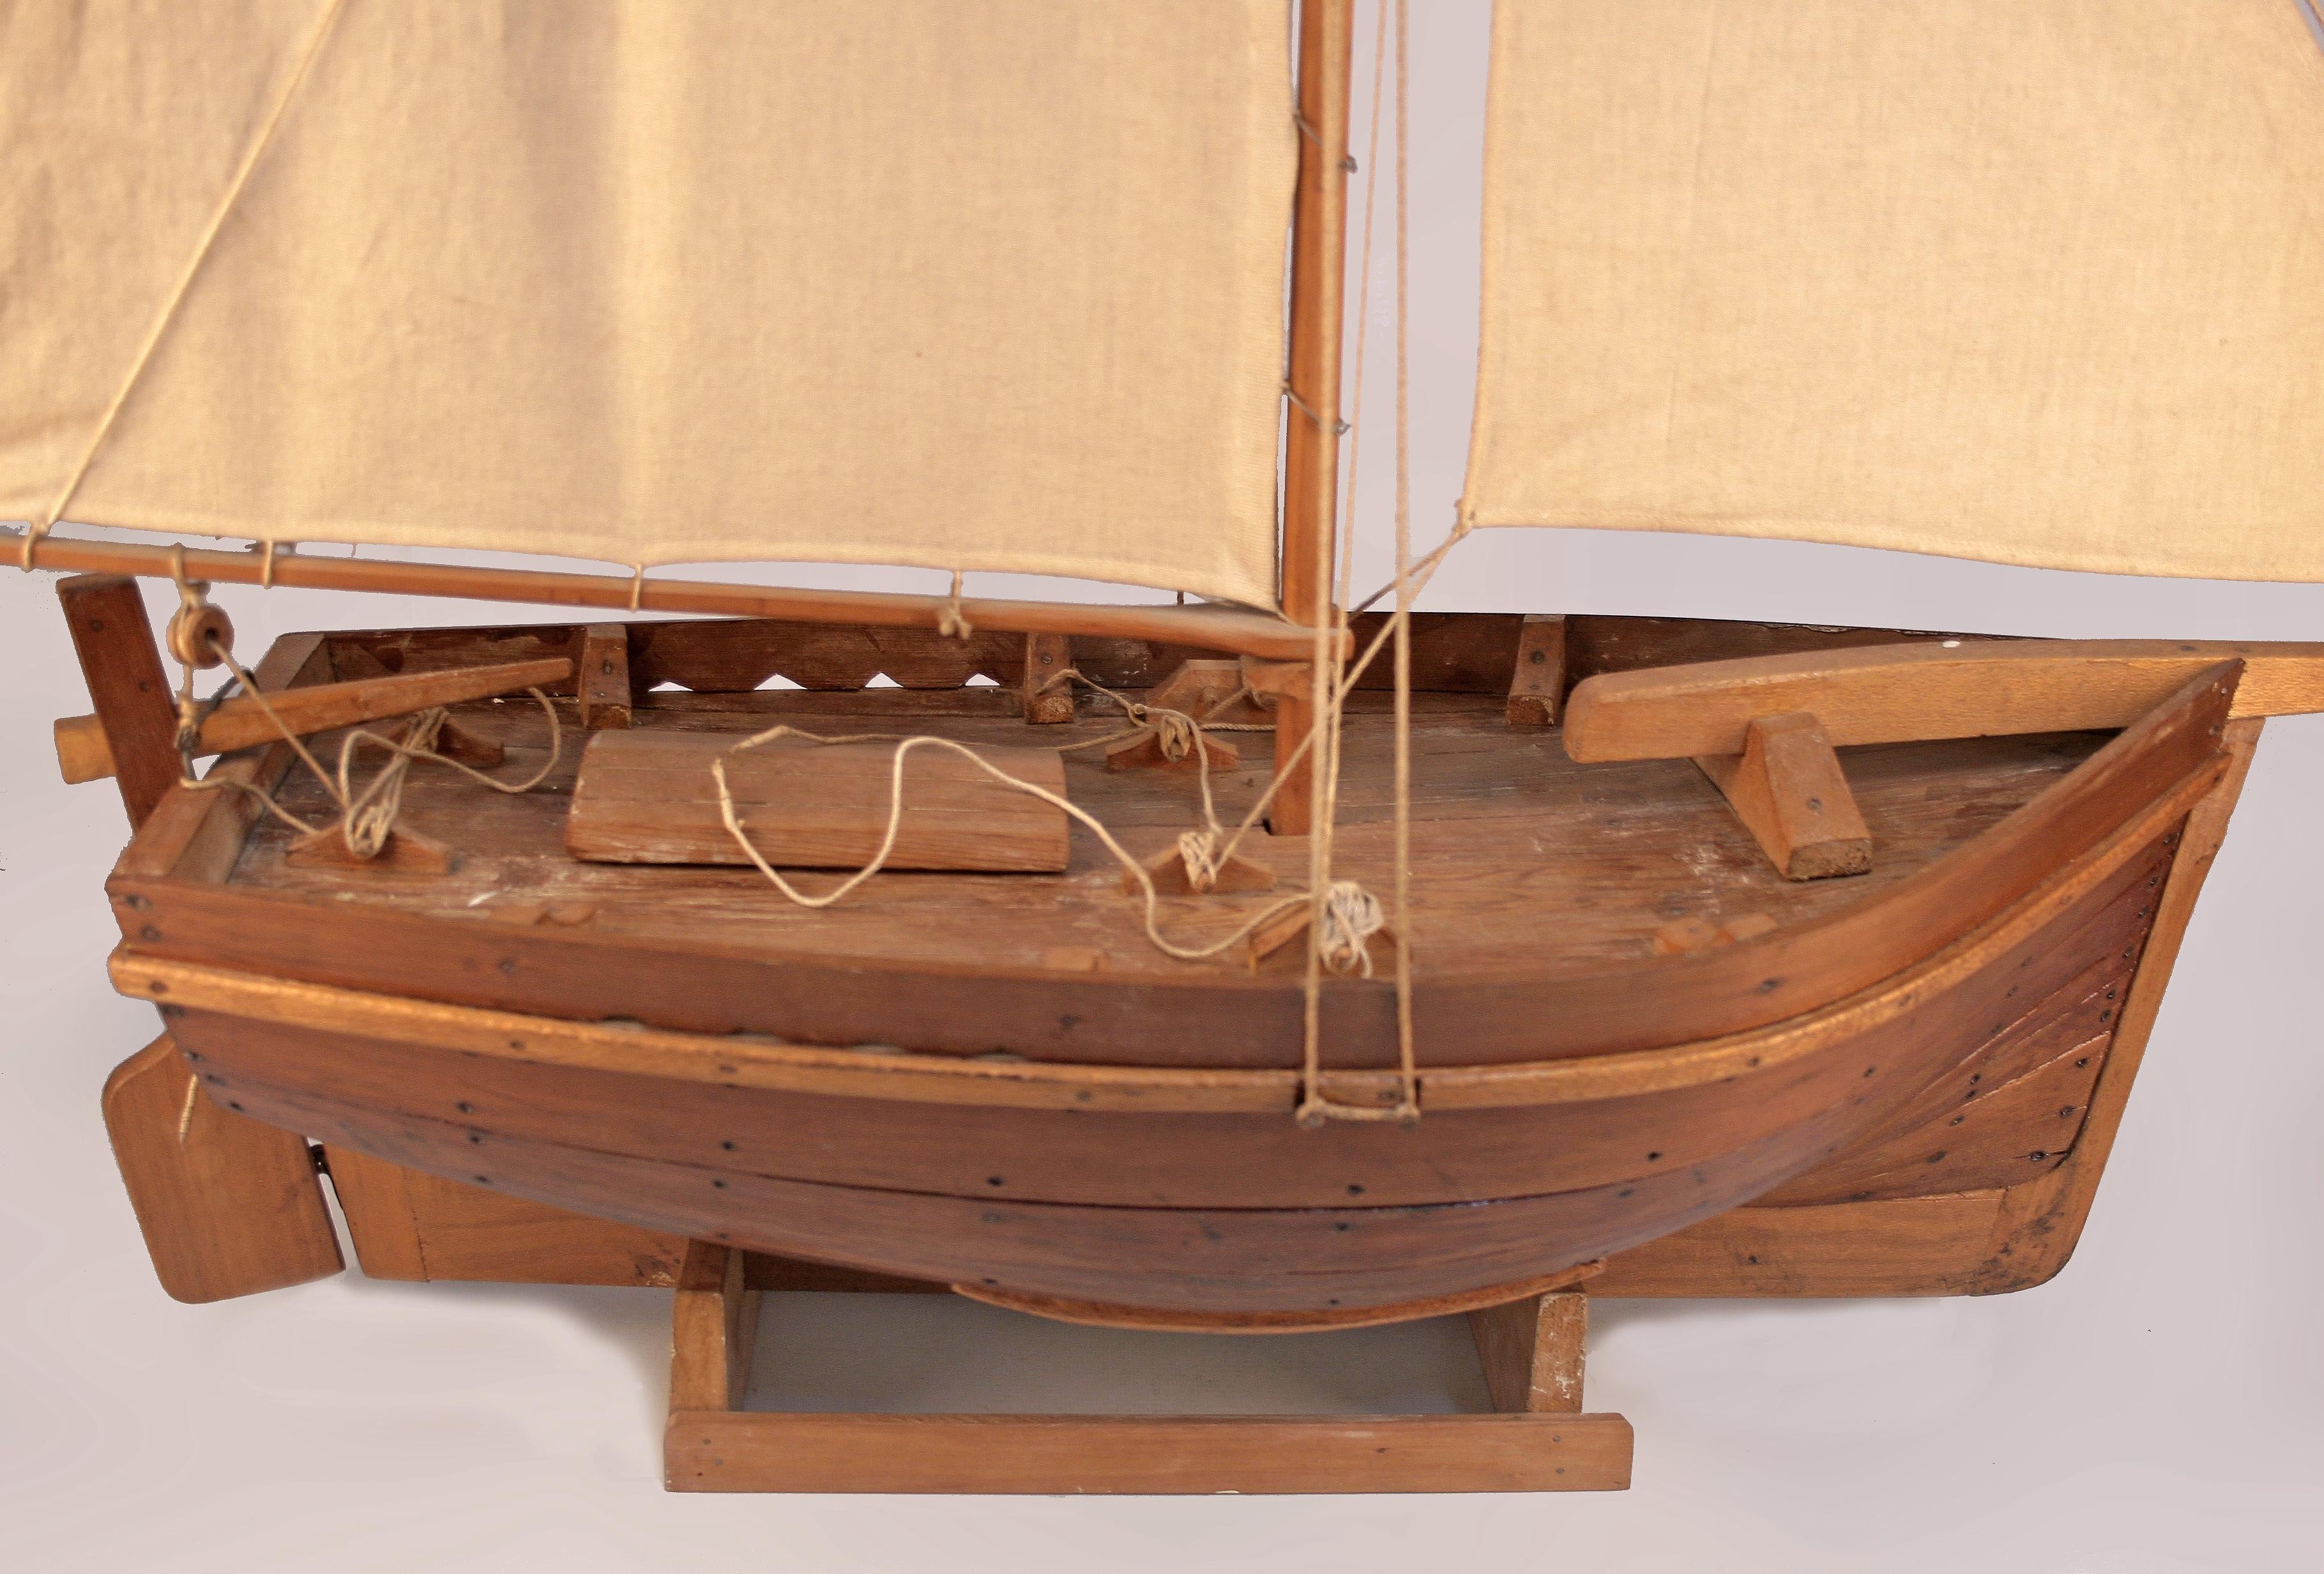 Argentine Mid-20th C. Wood Model of Antique Fishing Boat Ship With Sails Made in Argentina For Sale